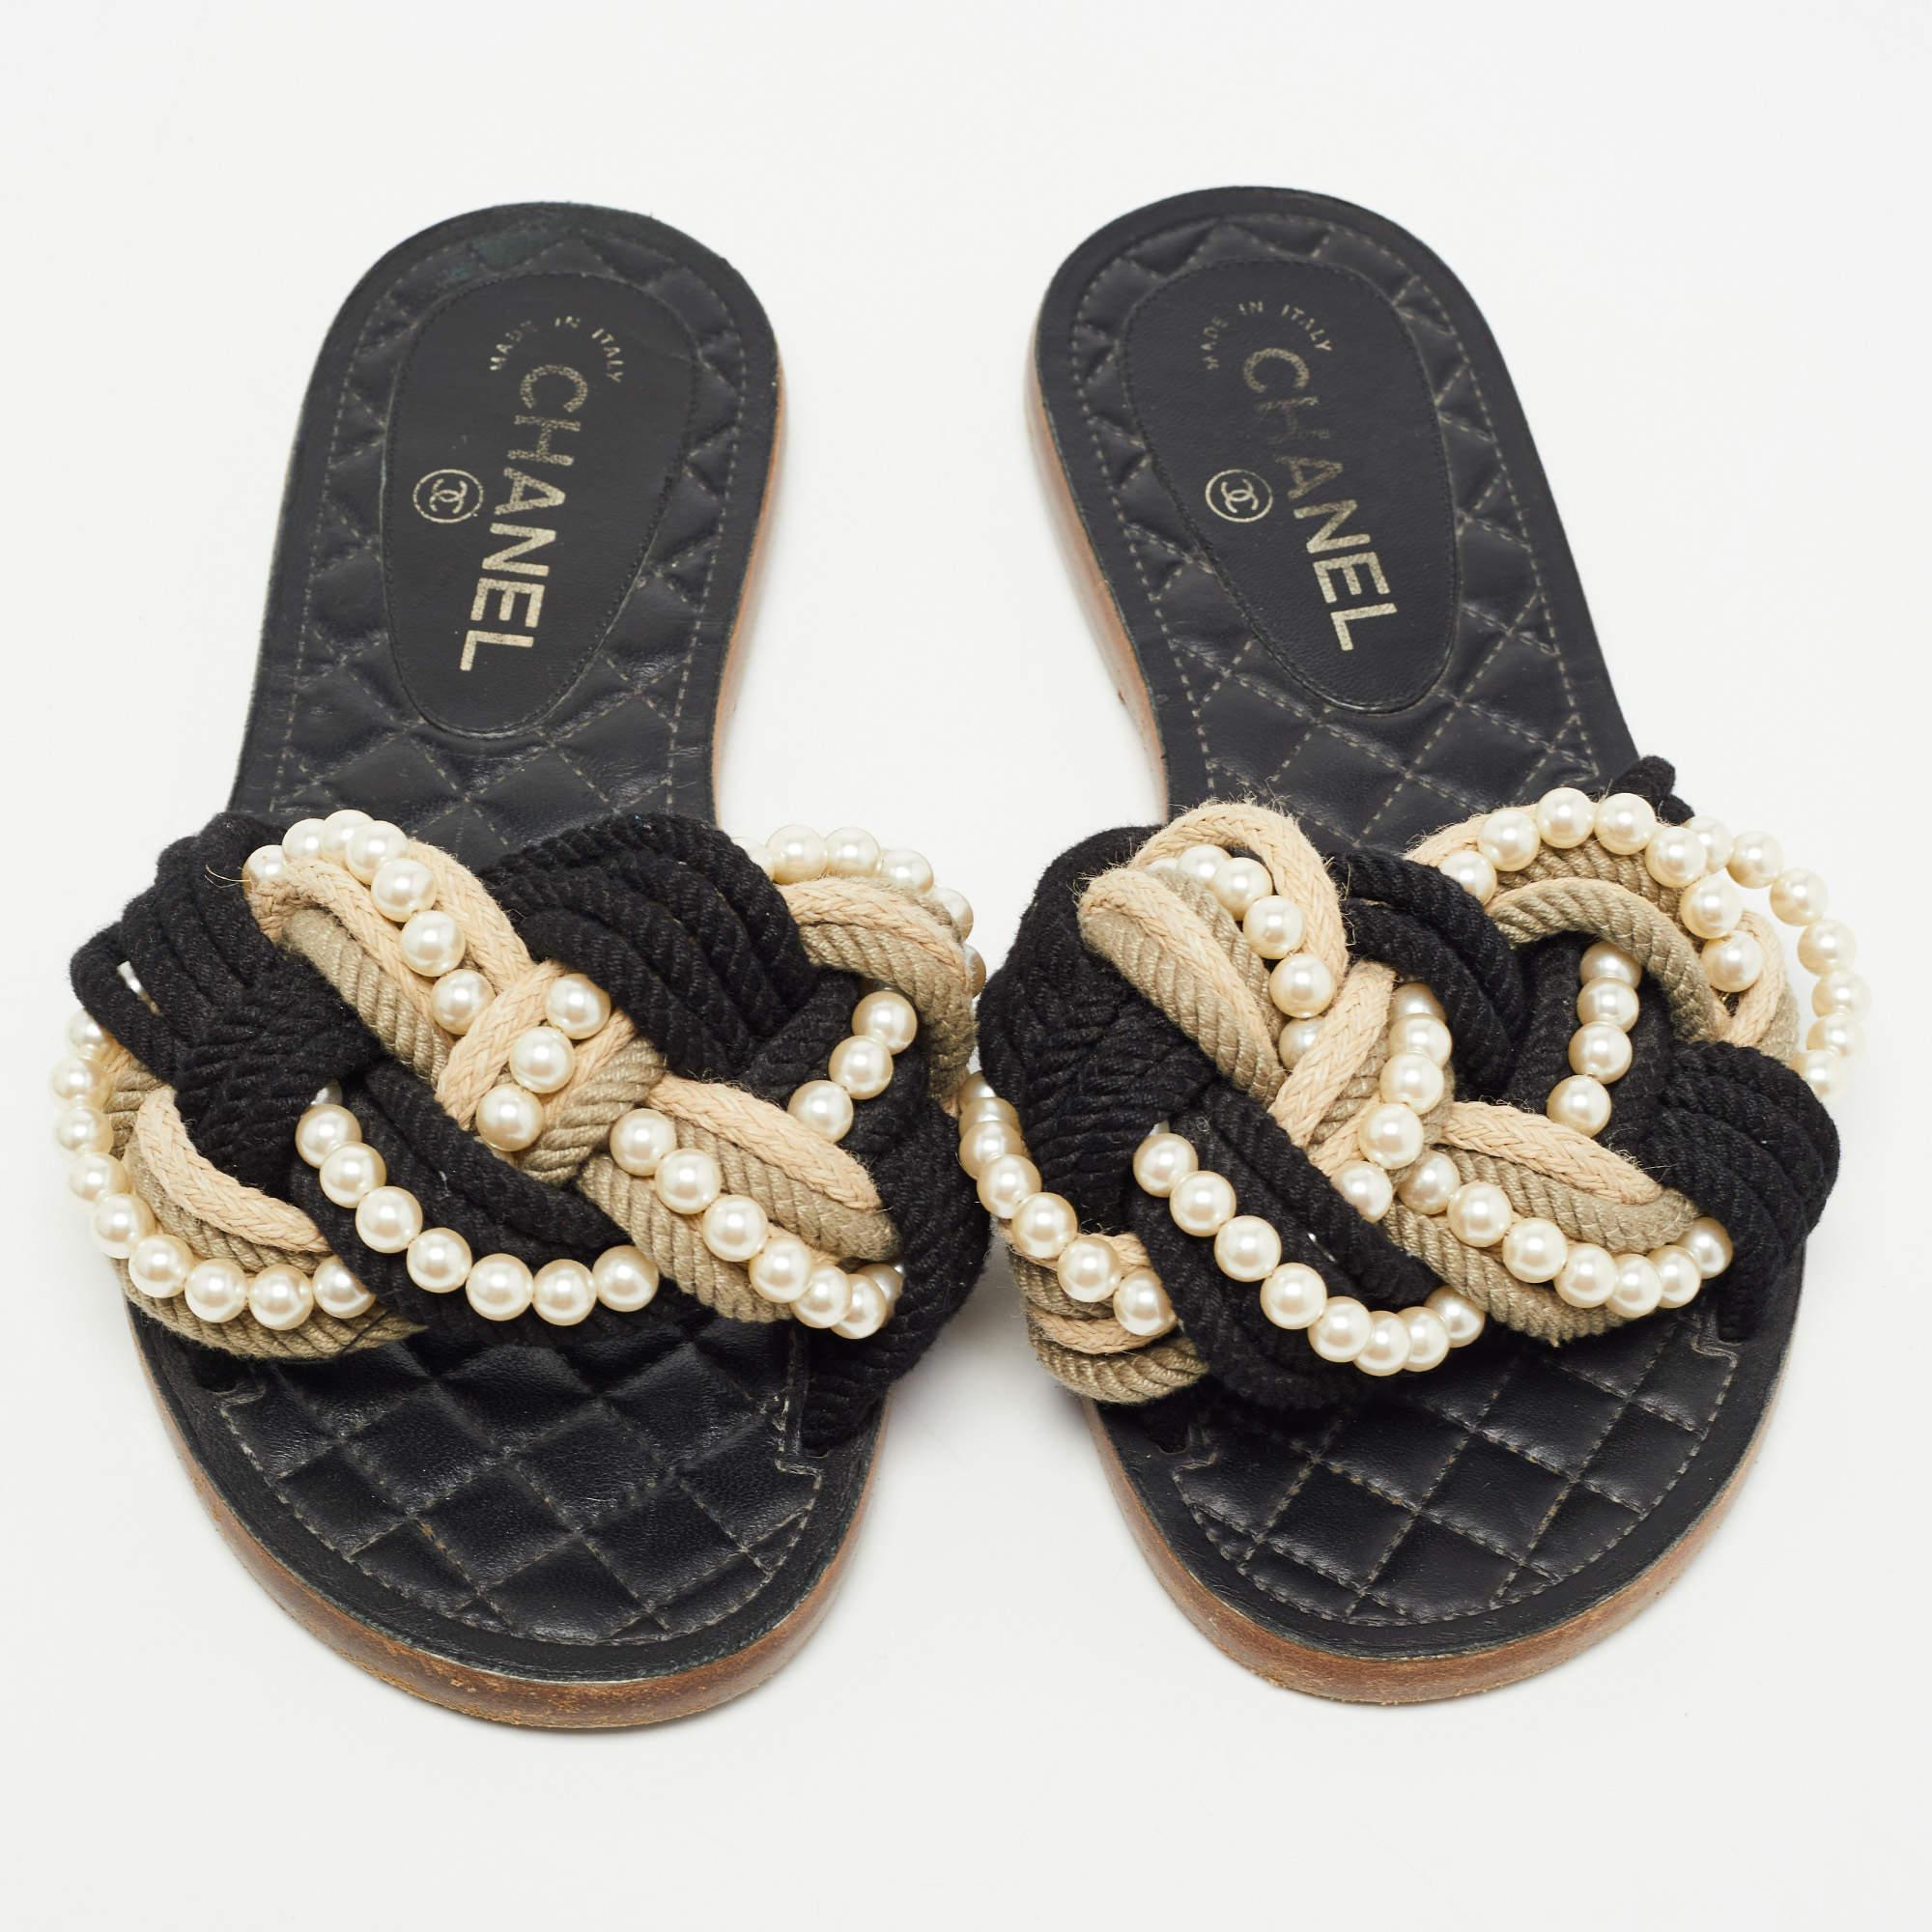 Dress up your outfits with these beautiful Chanel slides that are easy to wear and effortlessly stylish. Constructed in woven ropes, these slides feature decorative faux pearls for a signature look. They are set on durable soles.

